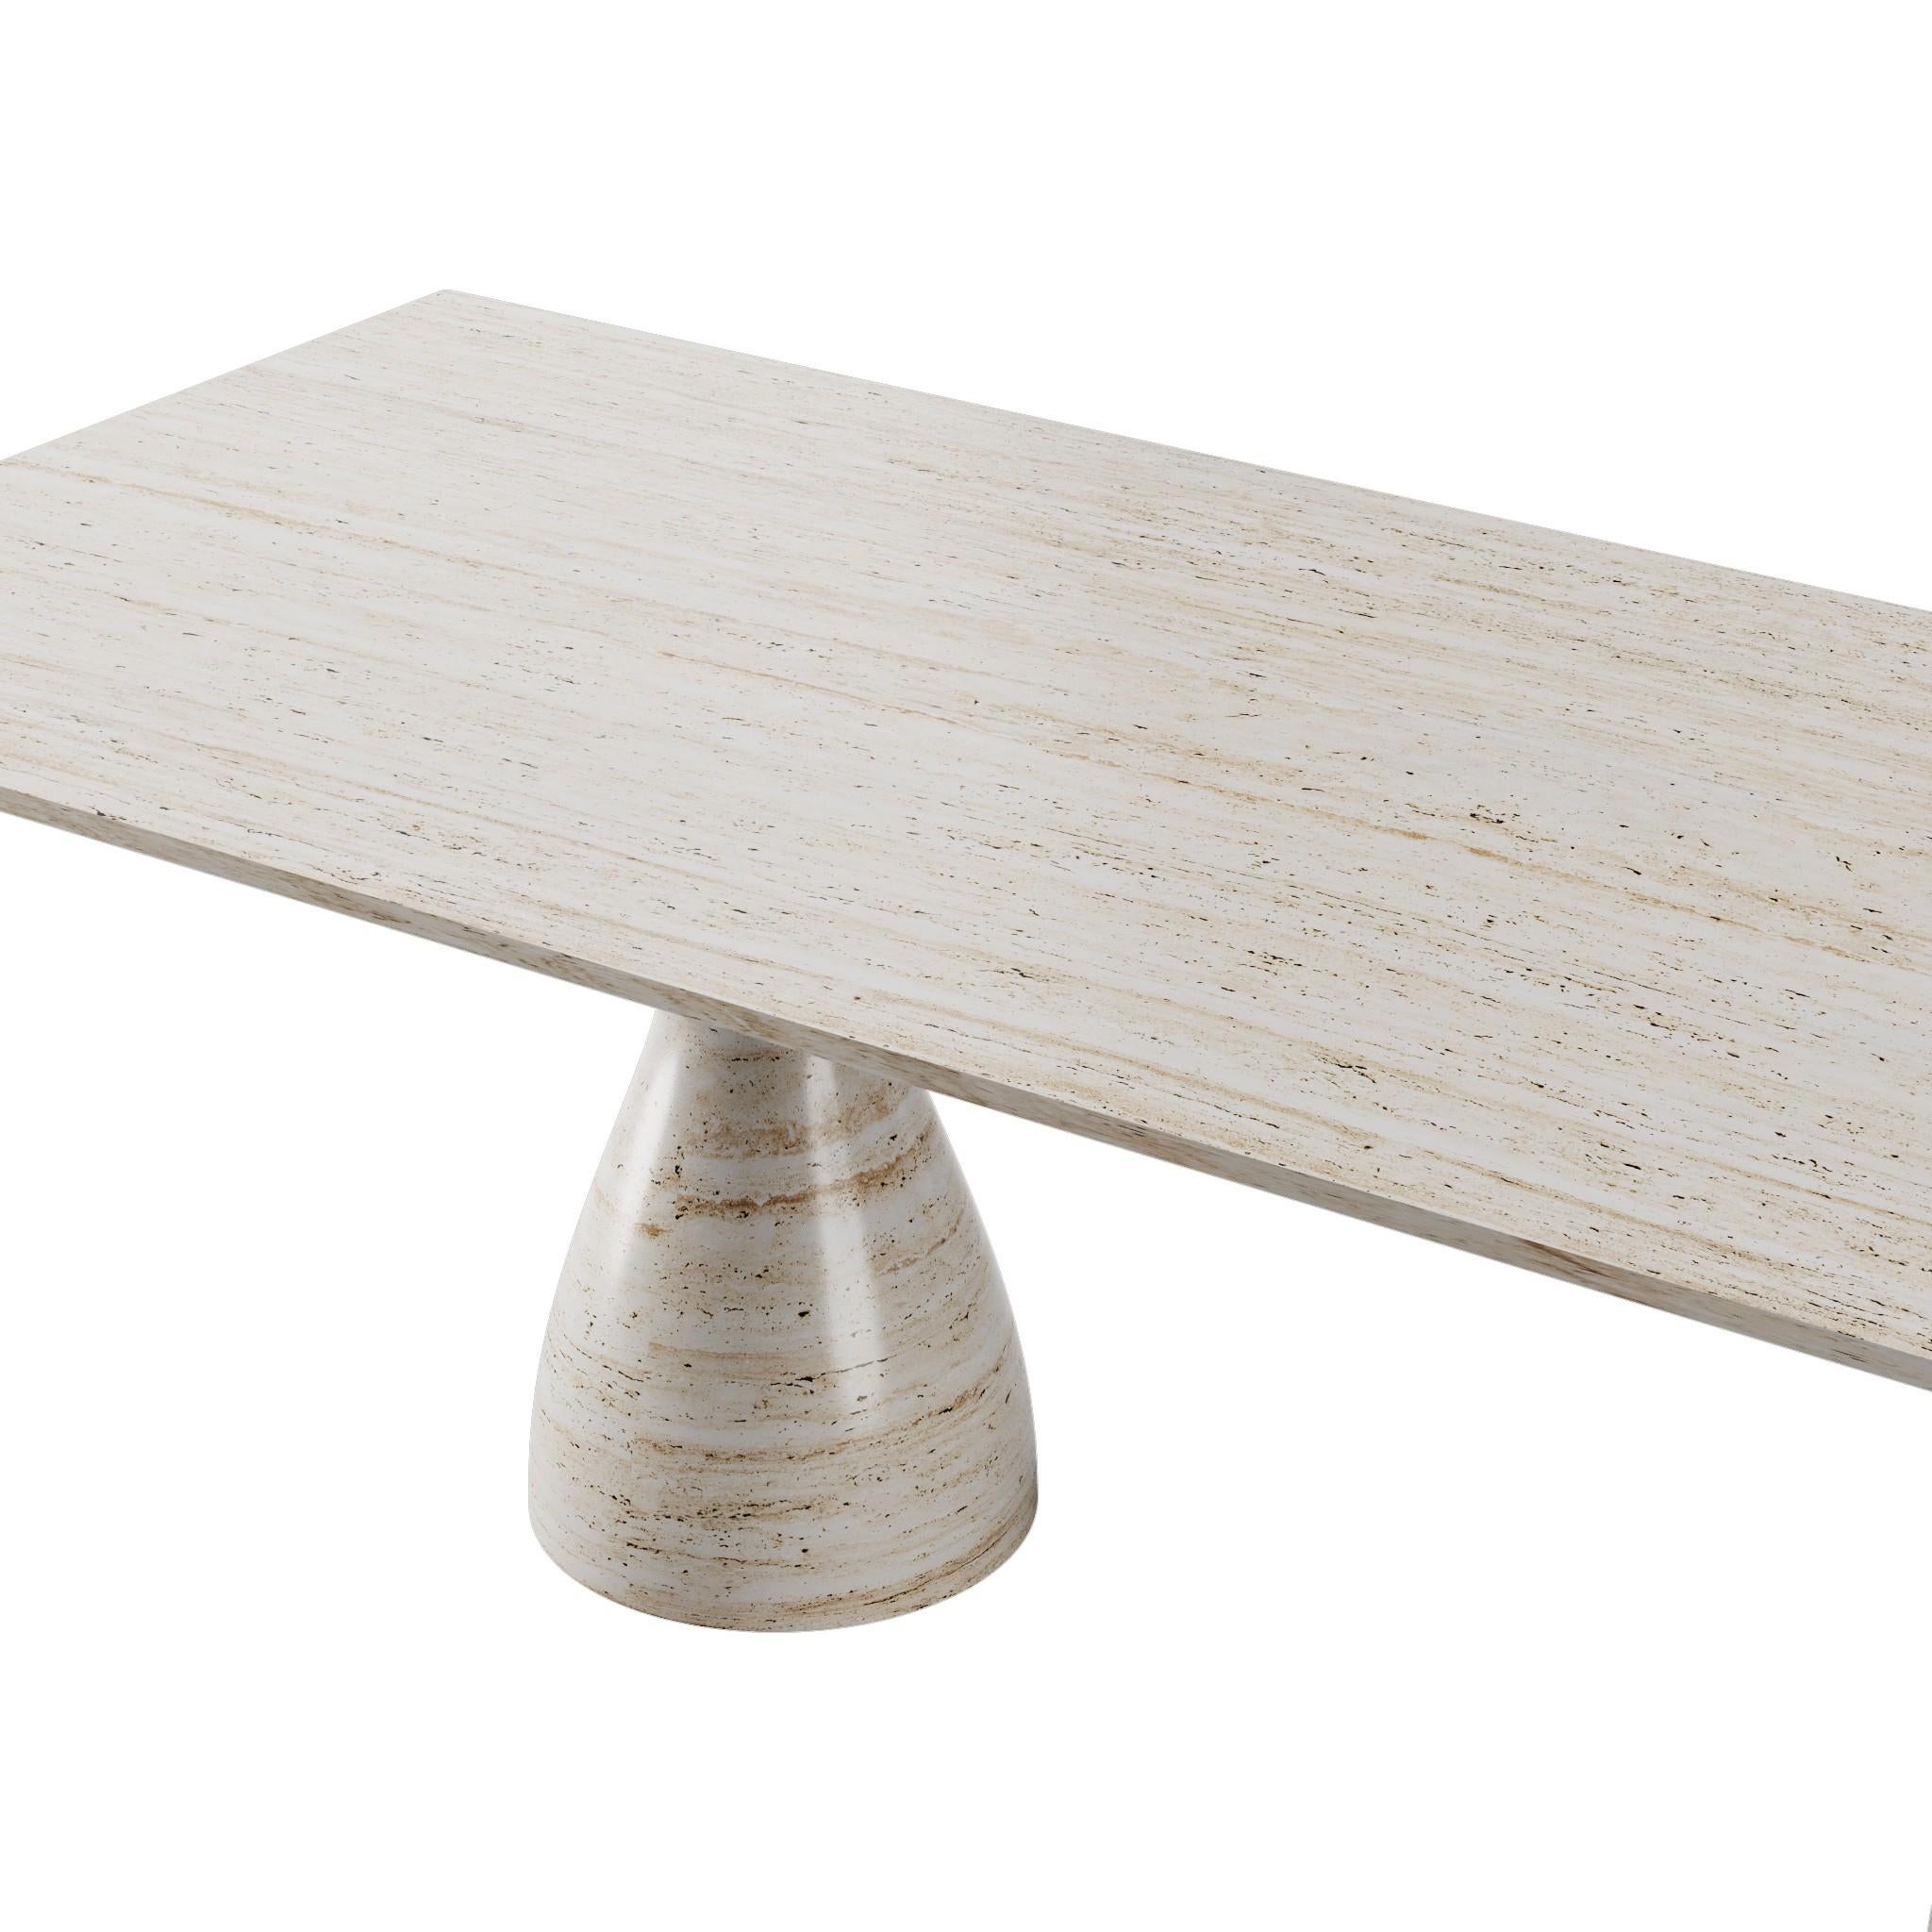 Portuguese Minimal Scandinavian Modern White Dining Table in Travertine Marble Curved Legs For Sale